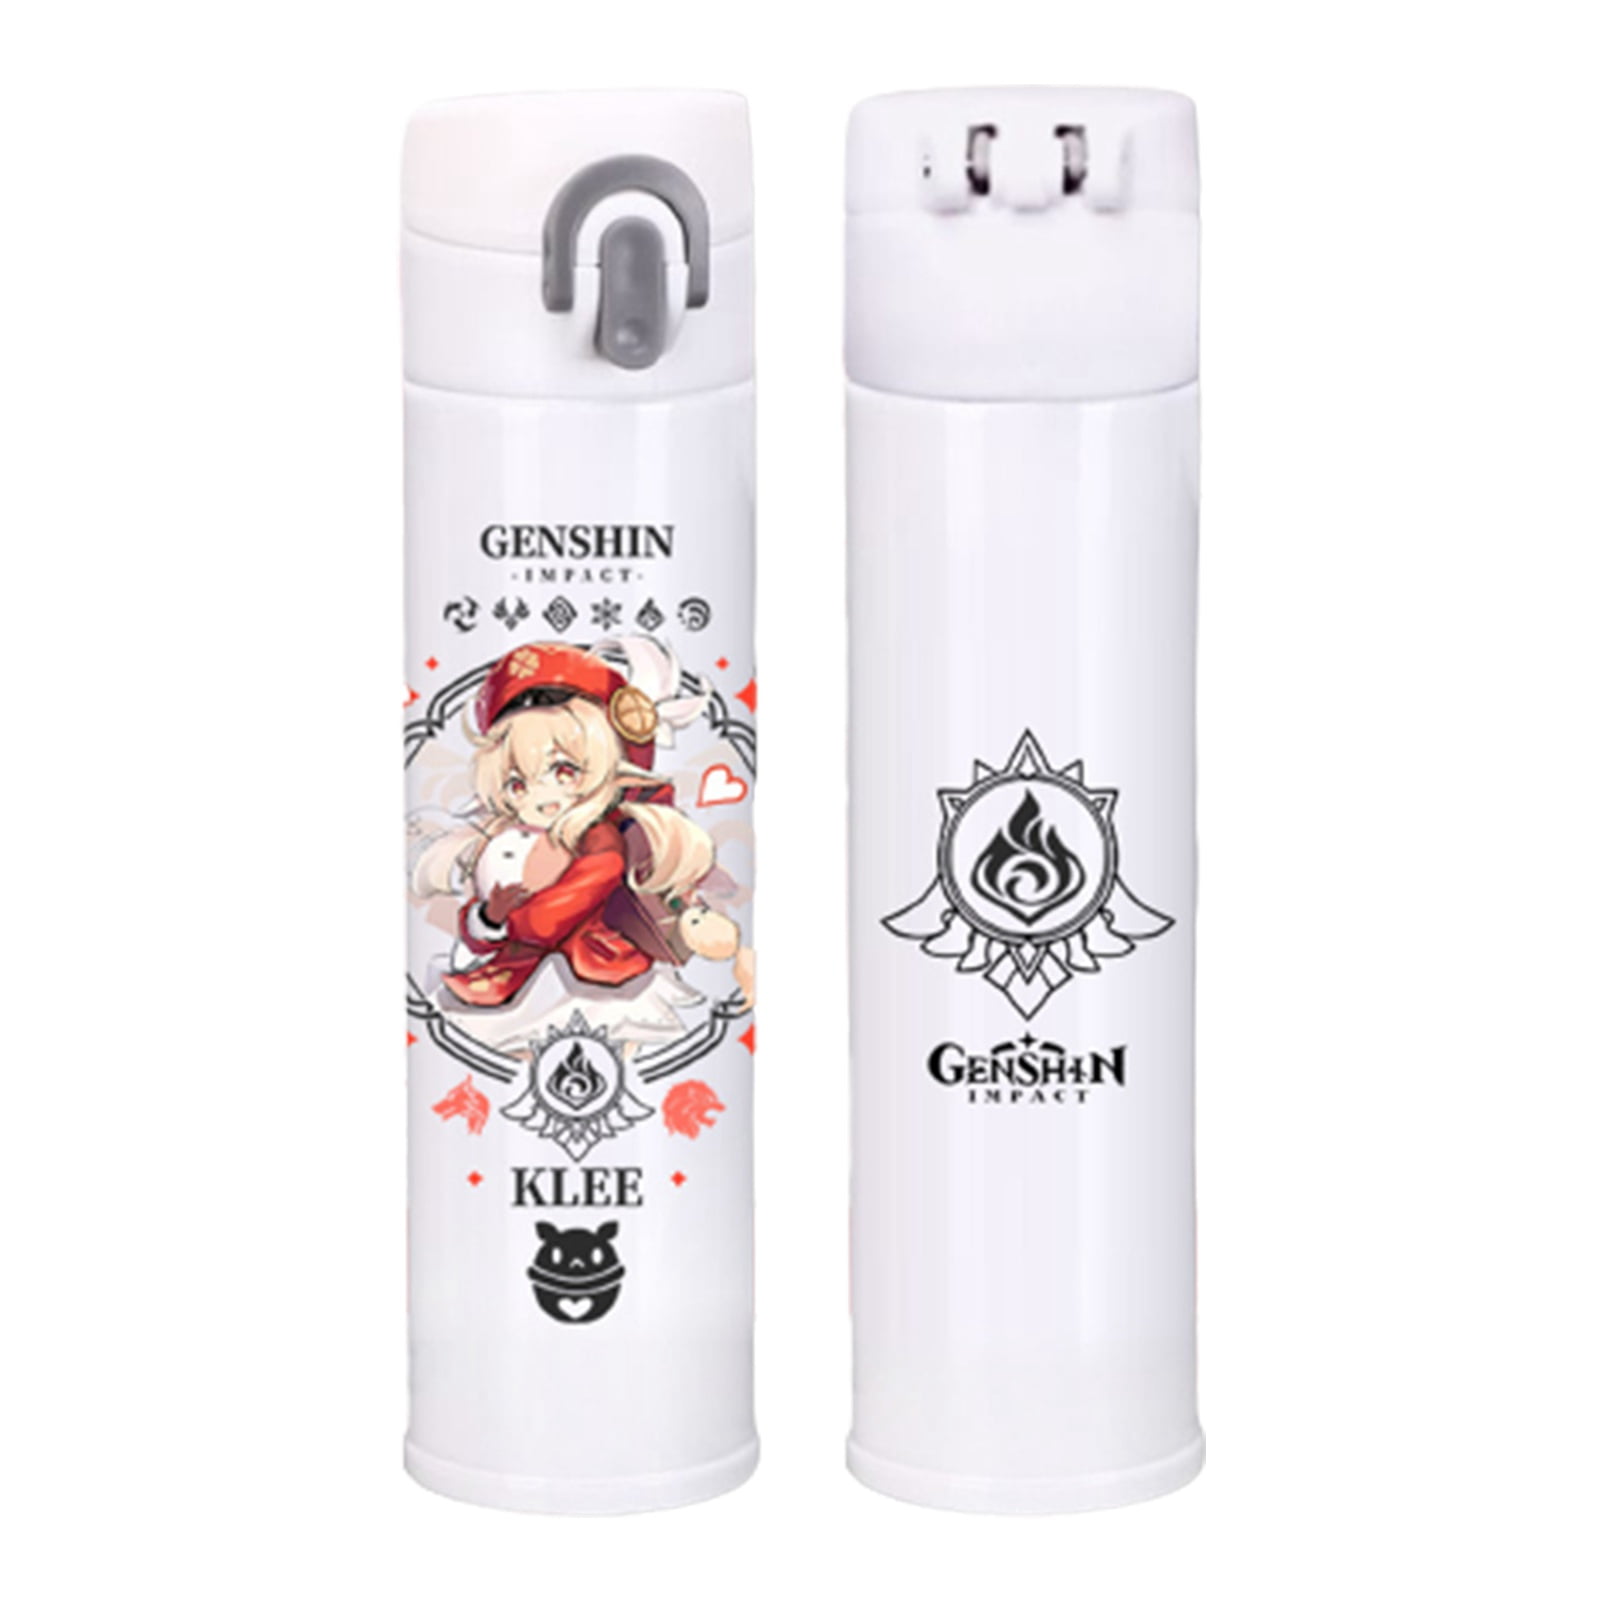 Riapawel Anime Theme Cartoon 304 Stainless Steel Thermos Cup Outdoor Sports Portable Water Bottles Drinking Cup, H01